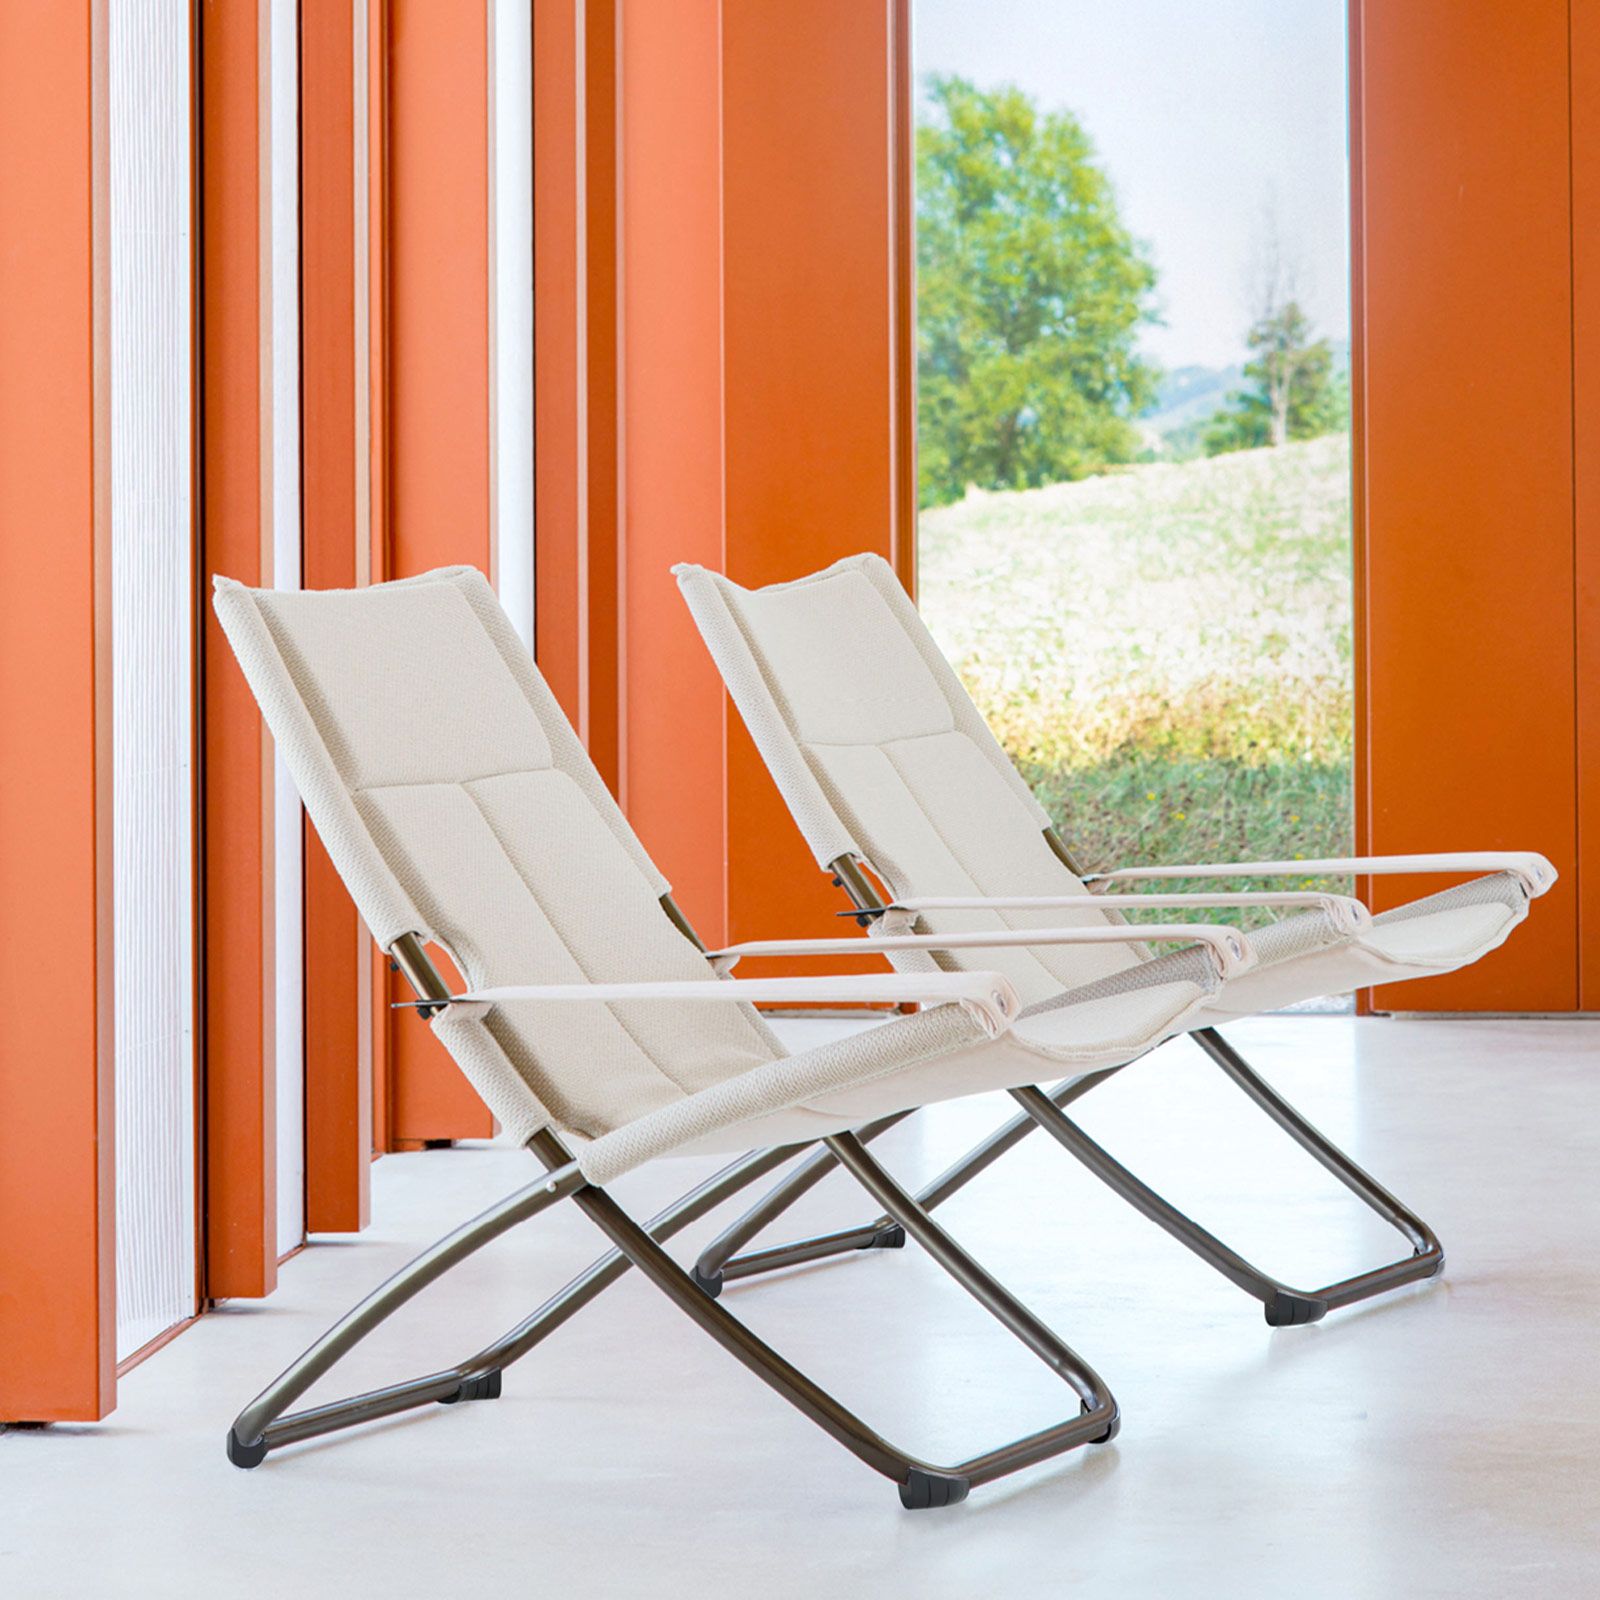 SNOOZE DECK CHAIR